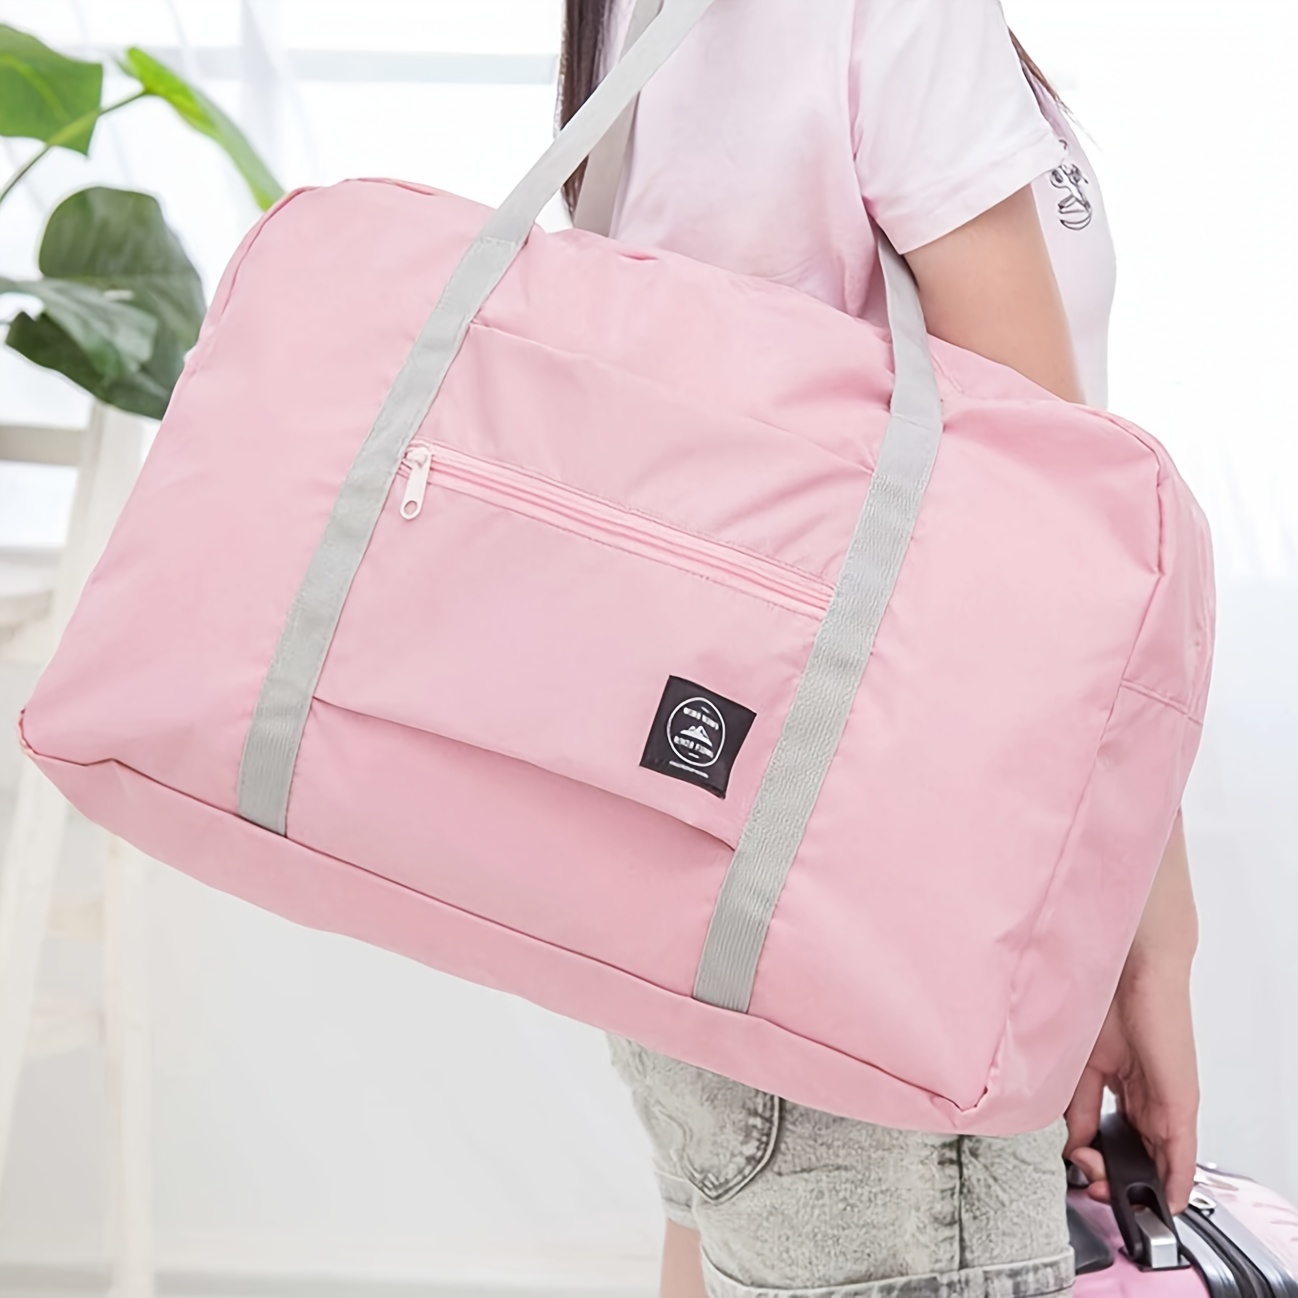  Airplane Hot Air Balloon Travel Bag, Weekender Bags for Women  Travel, Gym Bag, Carry on Bags for Airplanes, Duffle Bag for Men Travel,  Weekender Bag, Travel Duffle Bag